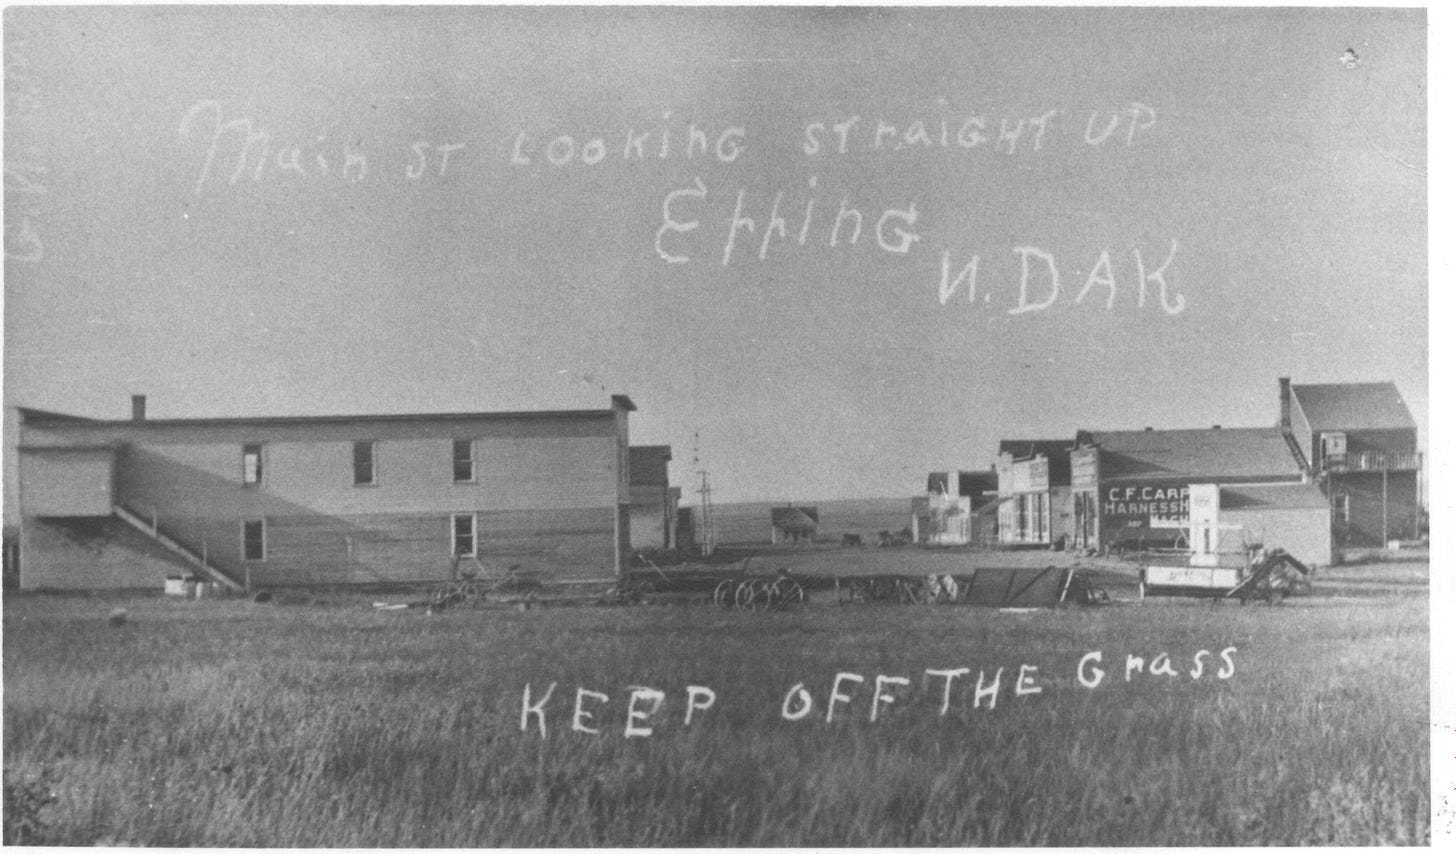 Epping ND, buildings, prairie, phrase 'keep off the grass"